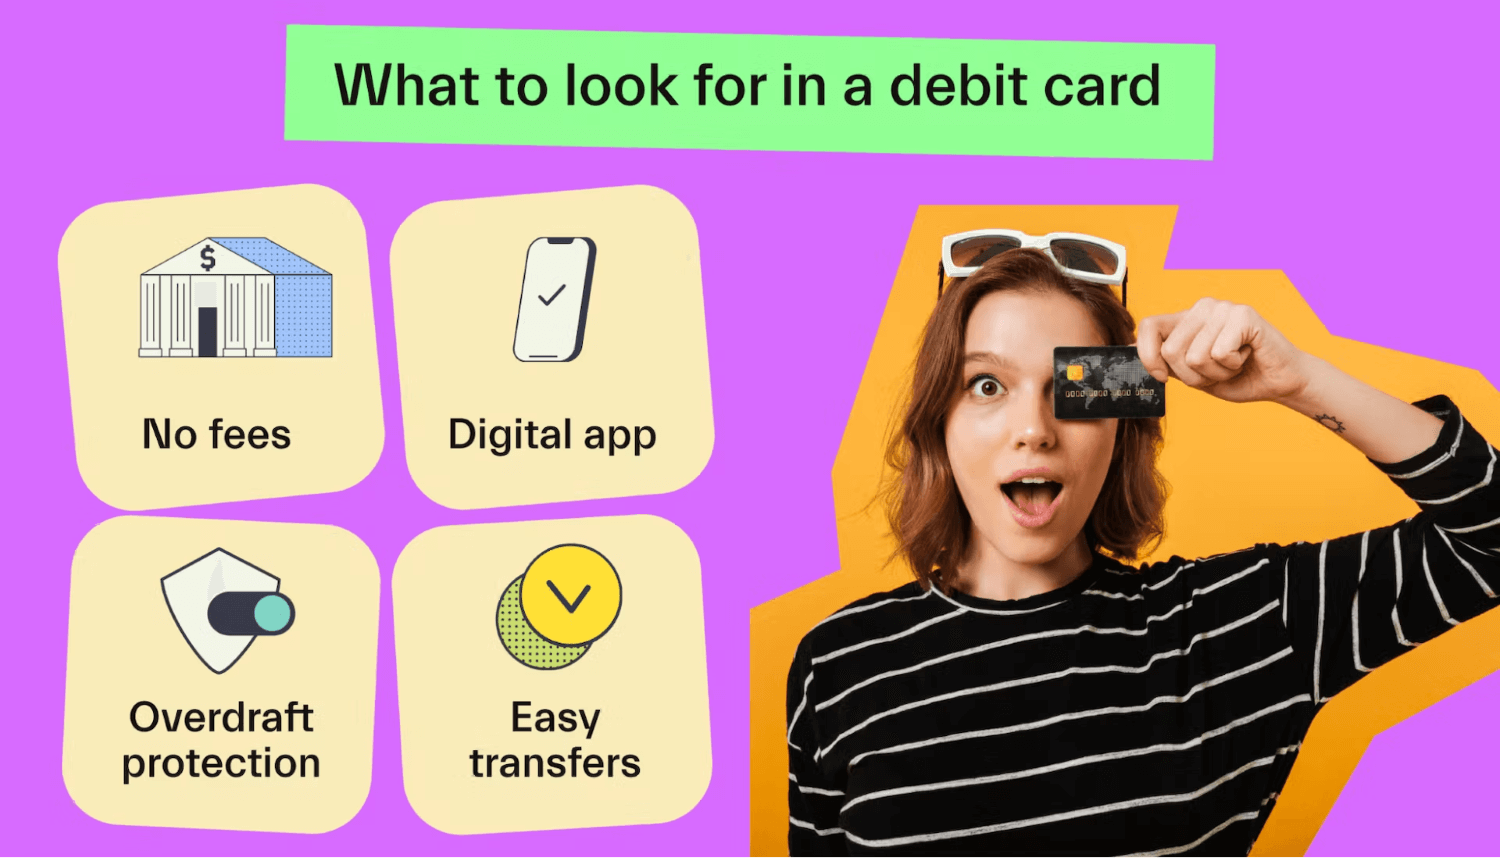 What To Look For in a Debit Card